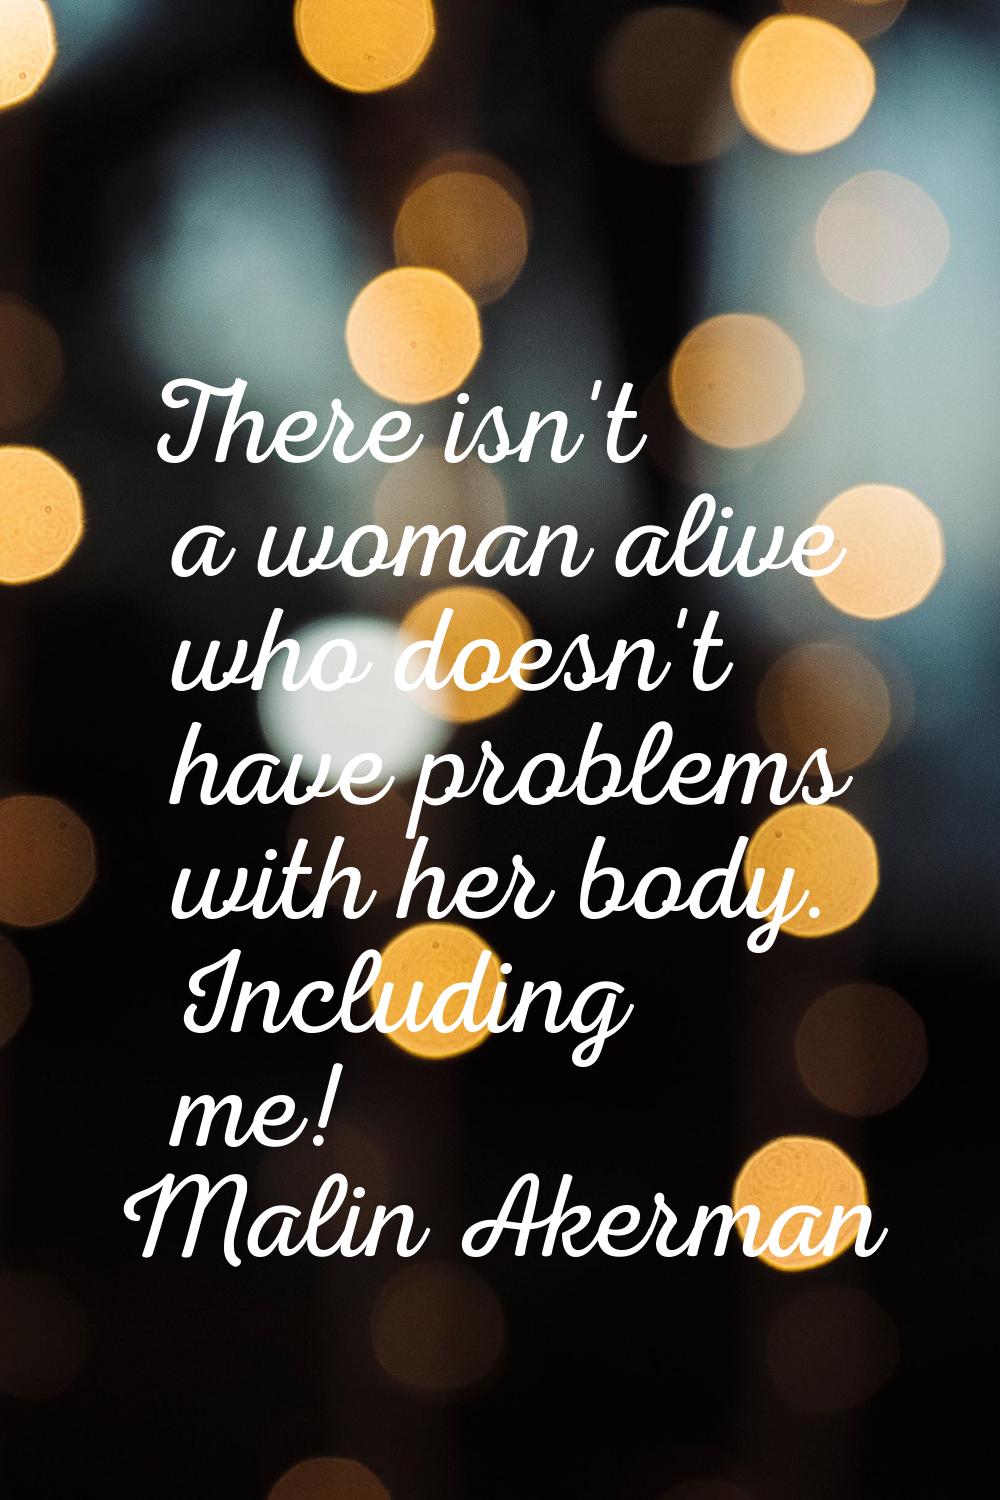 There isn't a woman alive who doesn't have problems with her body. Including me!